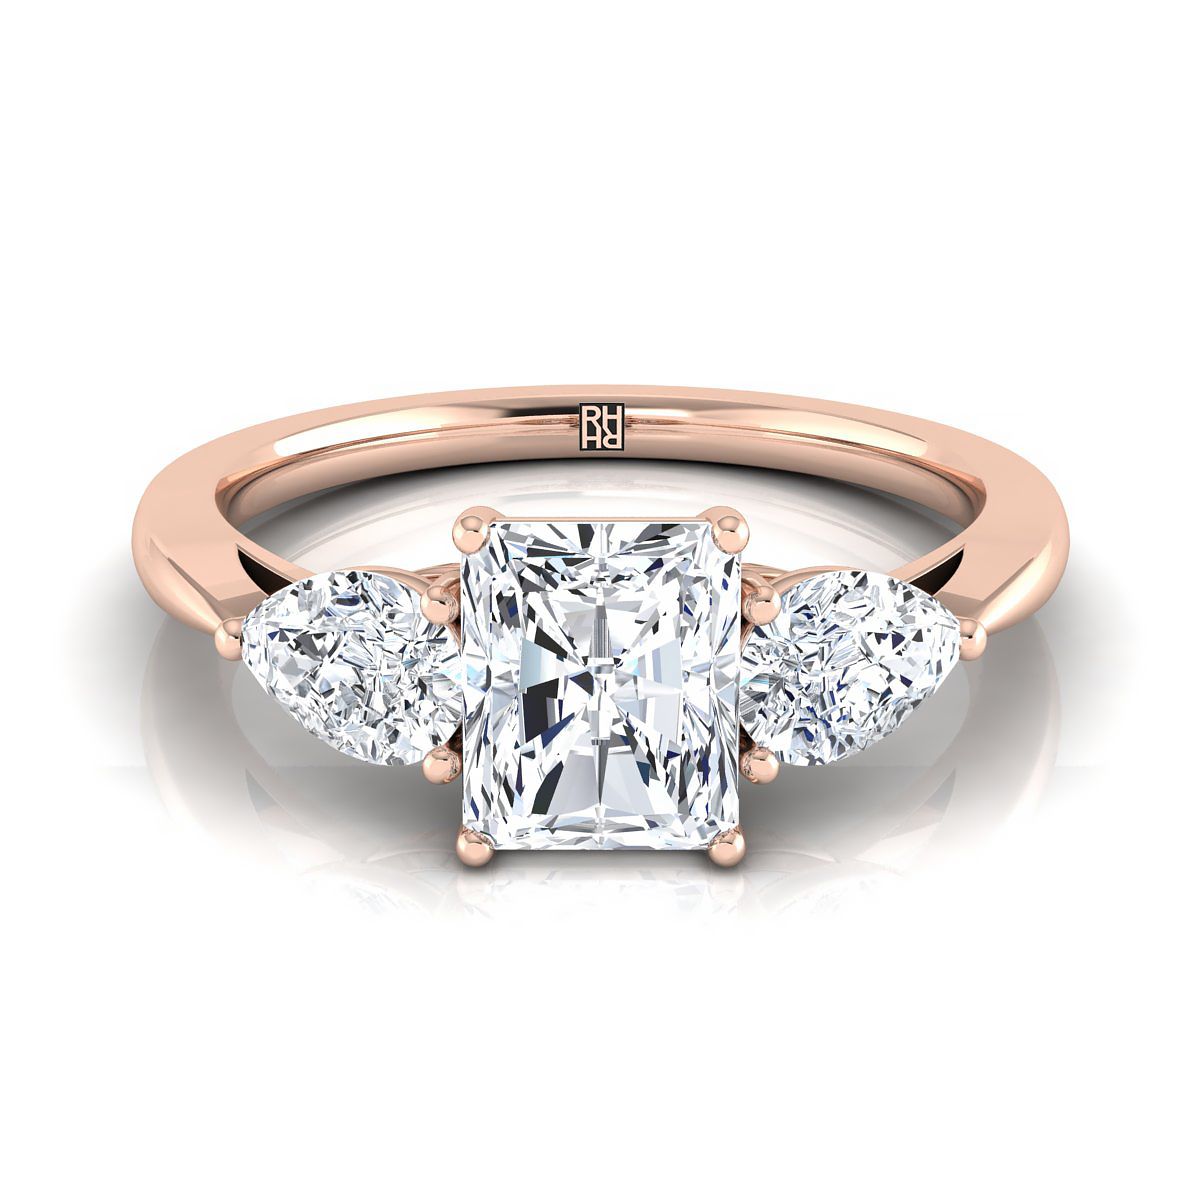 14K Rose Gold Radiant Cut Center Diamond Perfectly Matched Pear Shaped Three Diamond Engagement Ring -7/8ctw